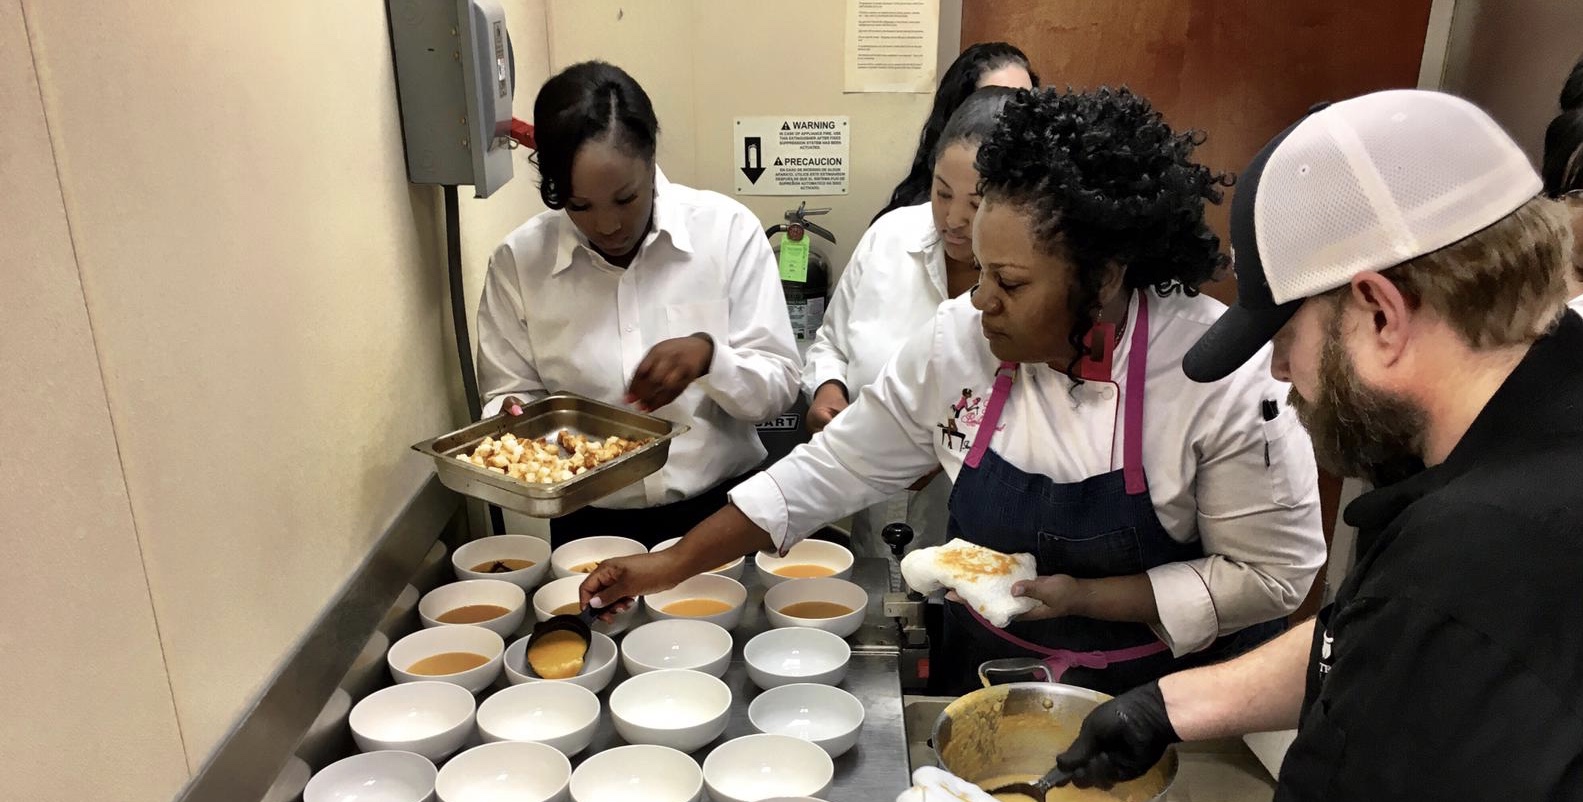 Chef Jennifer Hill Booker and Chef Rob Nelson (foreground) prepare pumpkin soup while their team adds finishing touches at the Inaugural Chef’s Dinner held by the Front Porch Hospitality Group. Credit: Charity Stephens